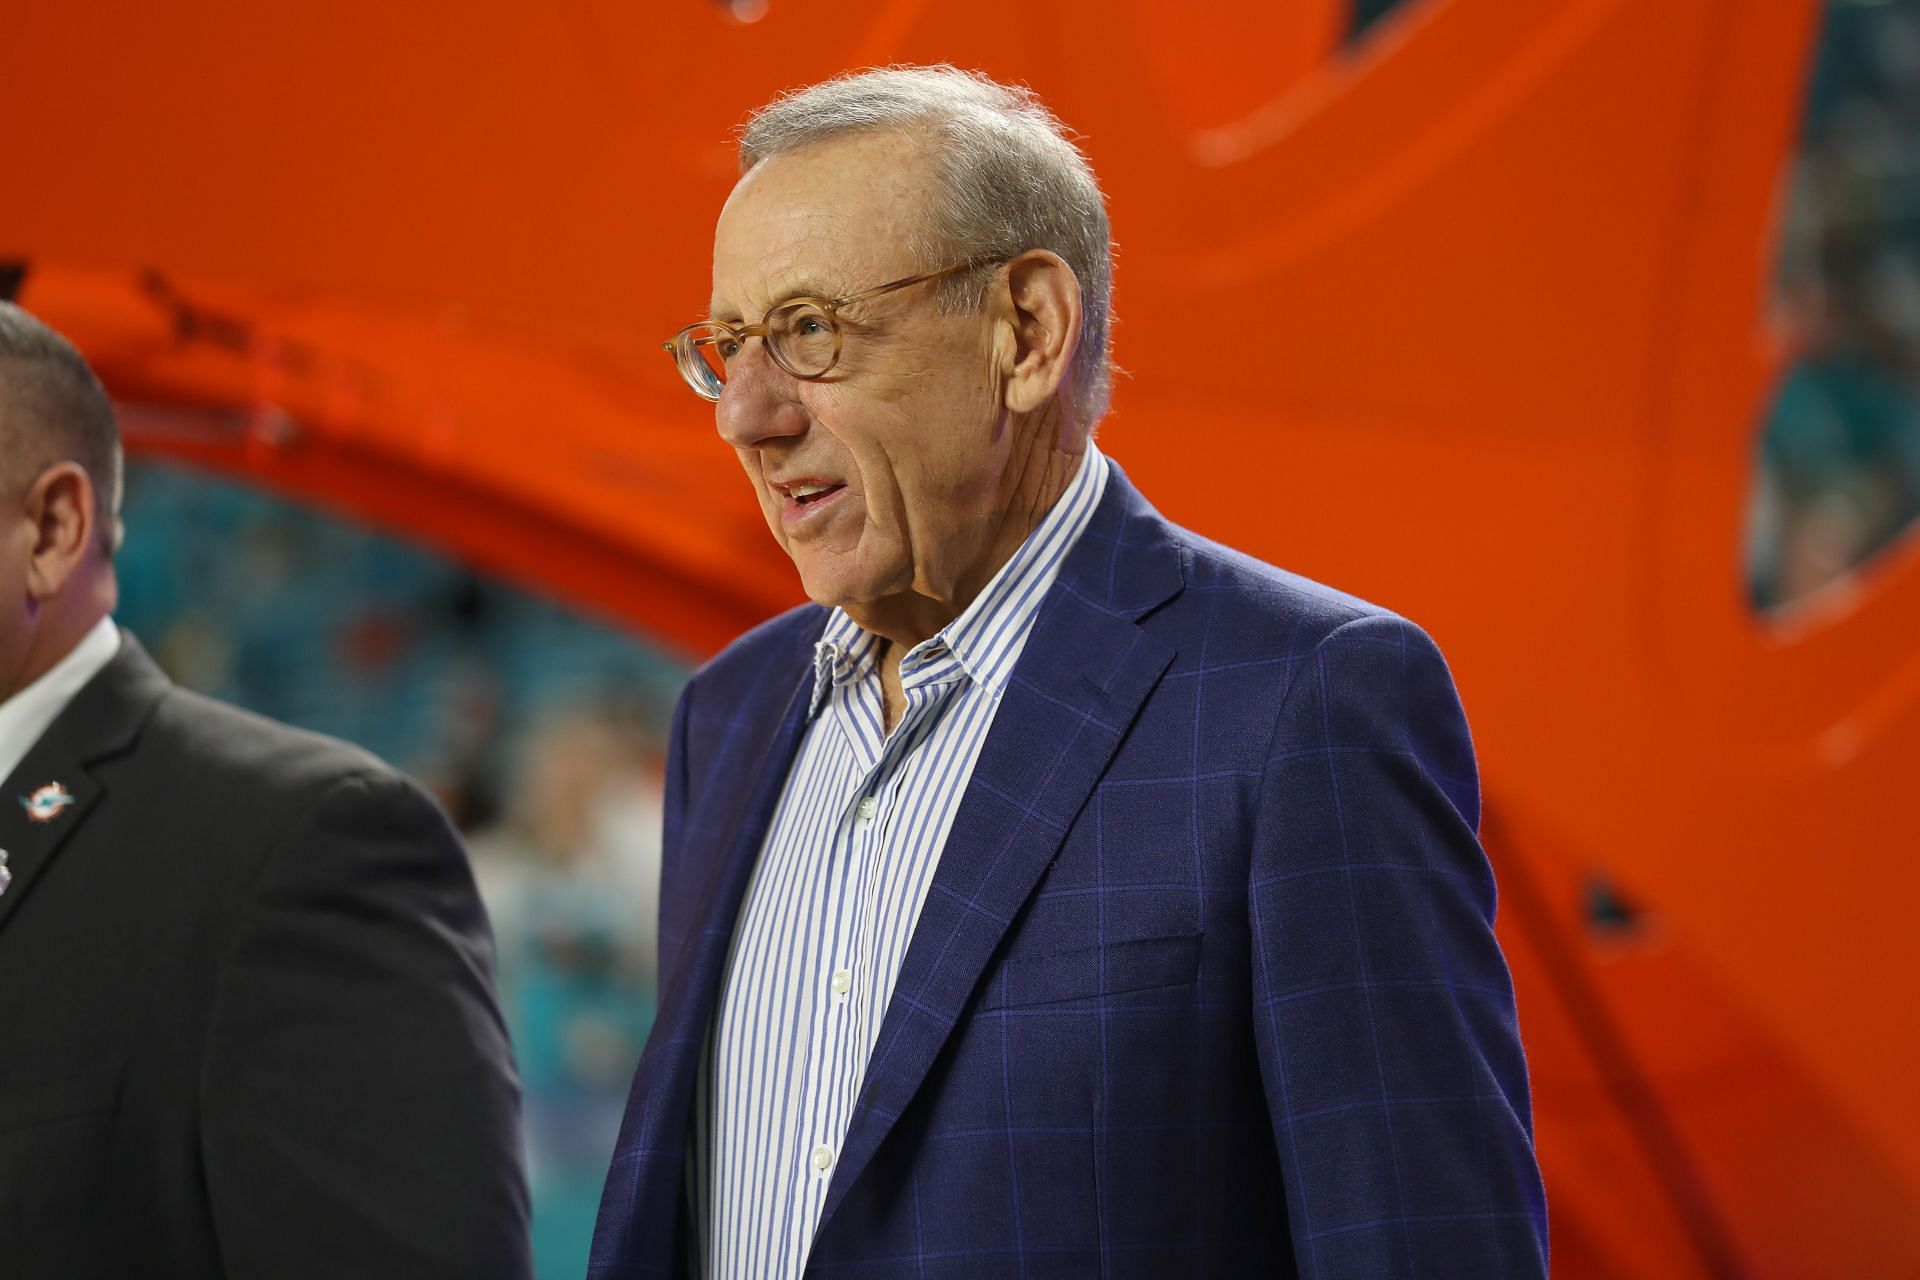 Stephen Ross is worth about $10.1 billion